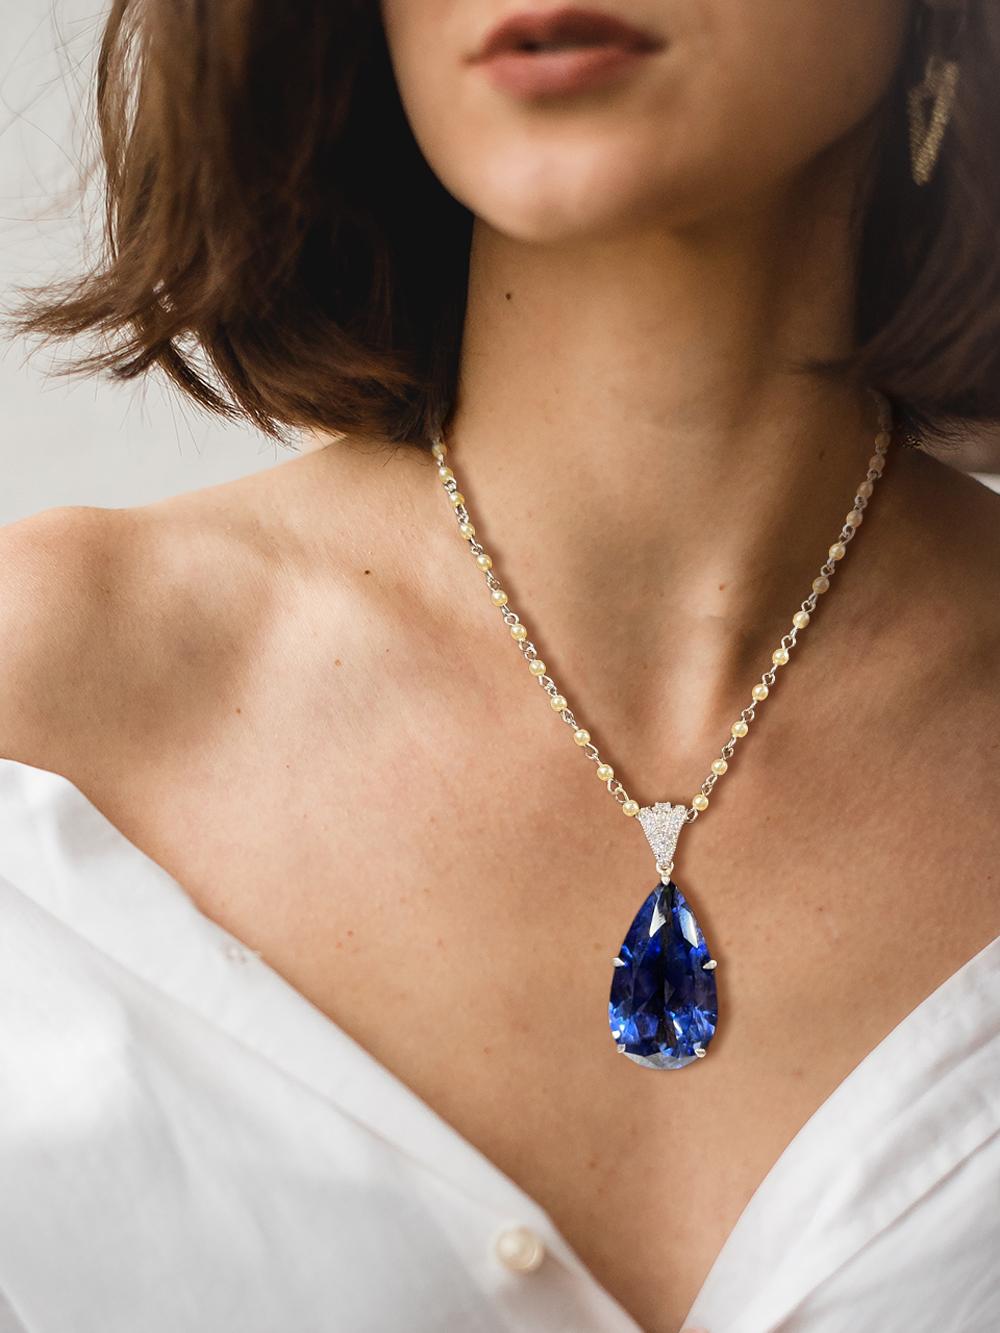 Art Deco Vintage Costume Jewelry Large Sapphire Drop Diamanté Pearl Chain Necklace Sterling Rhodium Pendant  Elegant Art Deco style beautiful man-made Cornflower Blue  sapphire drop on a dainty pearl chain can change length, so please let us know.